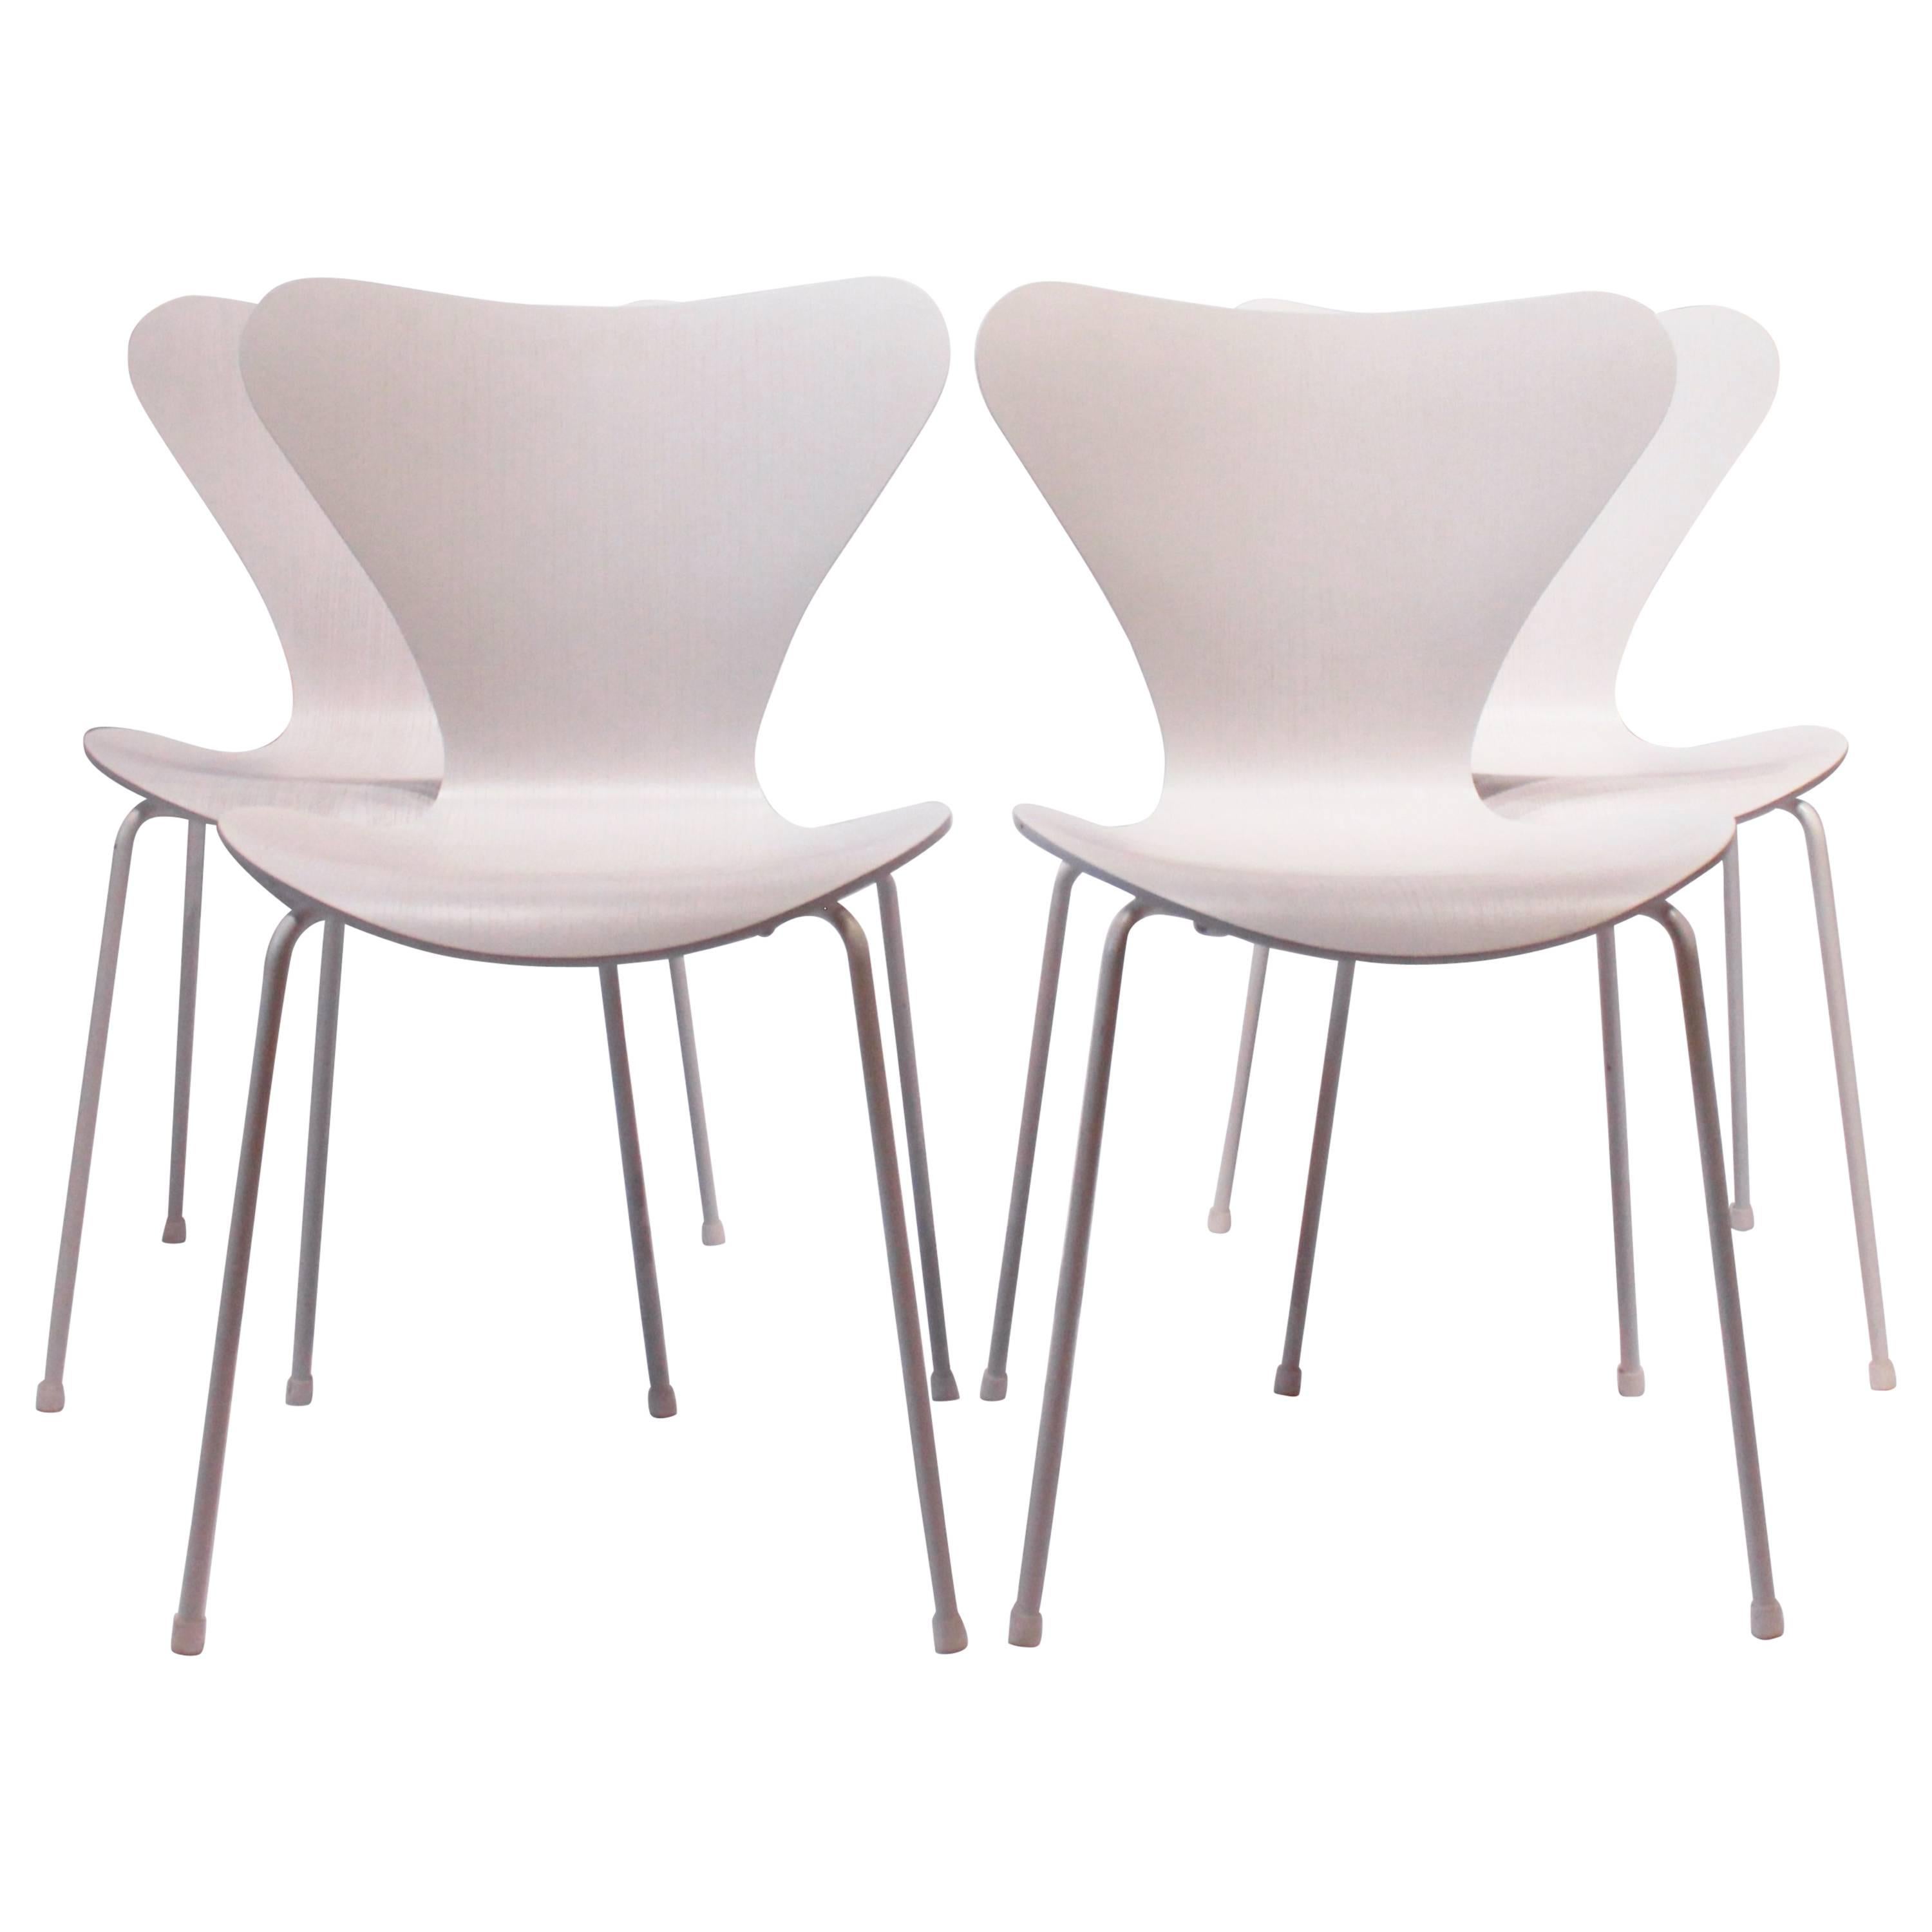 Set of Four Seven Chairs, Model 3107, Limited Edition #105 by Arne Jacobsen For Sale